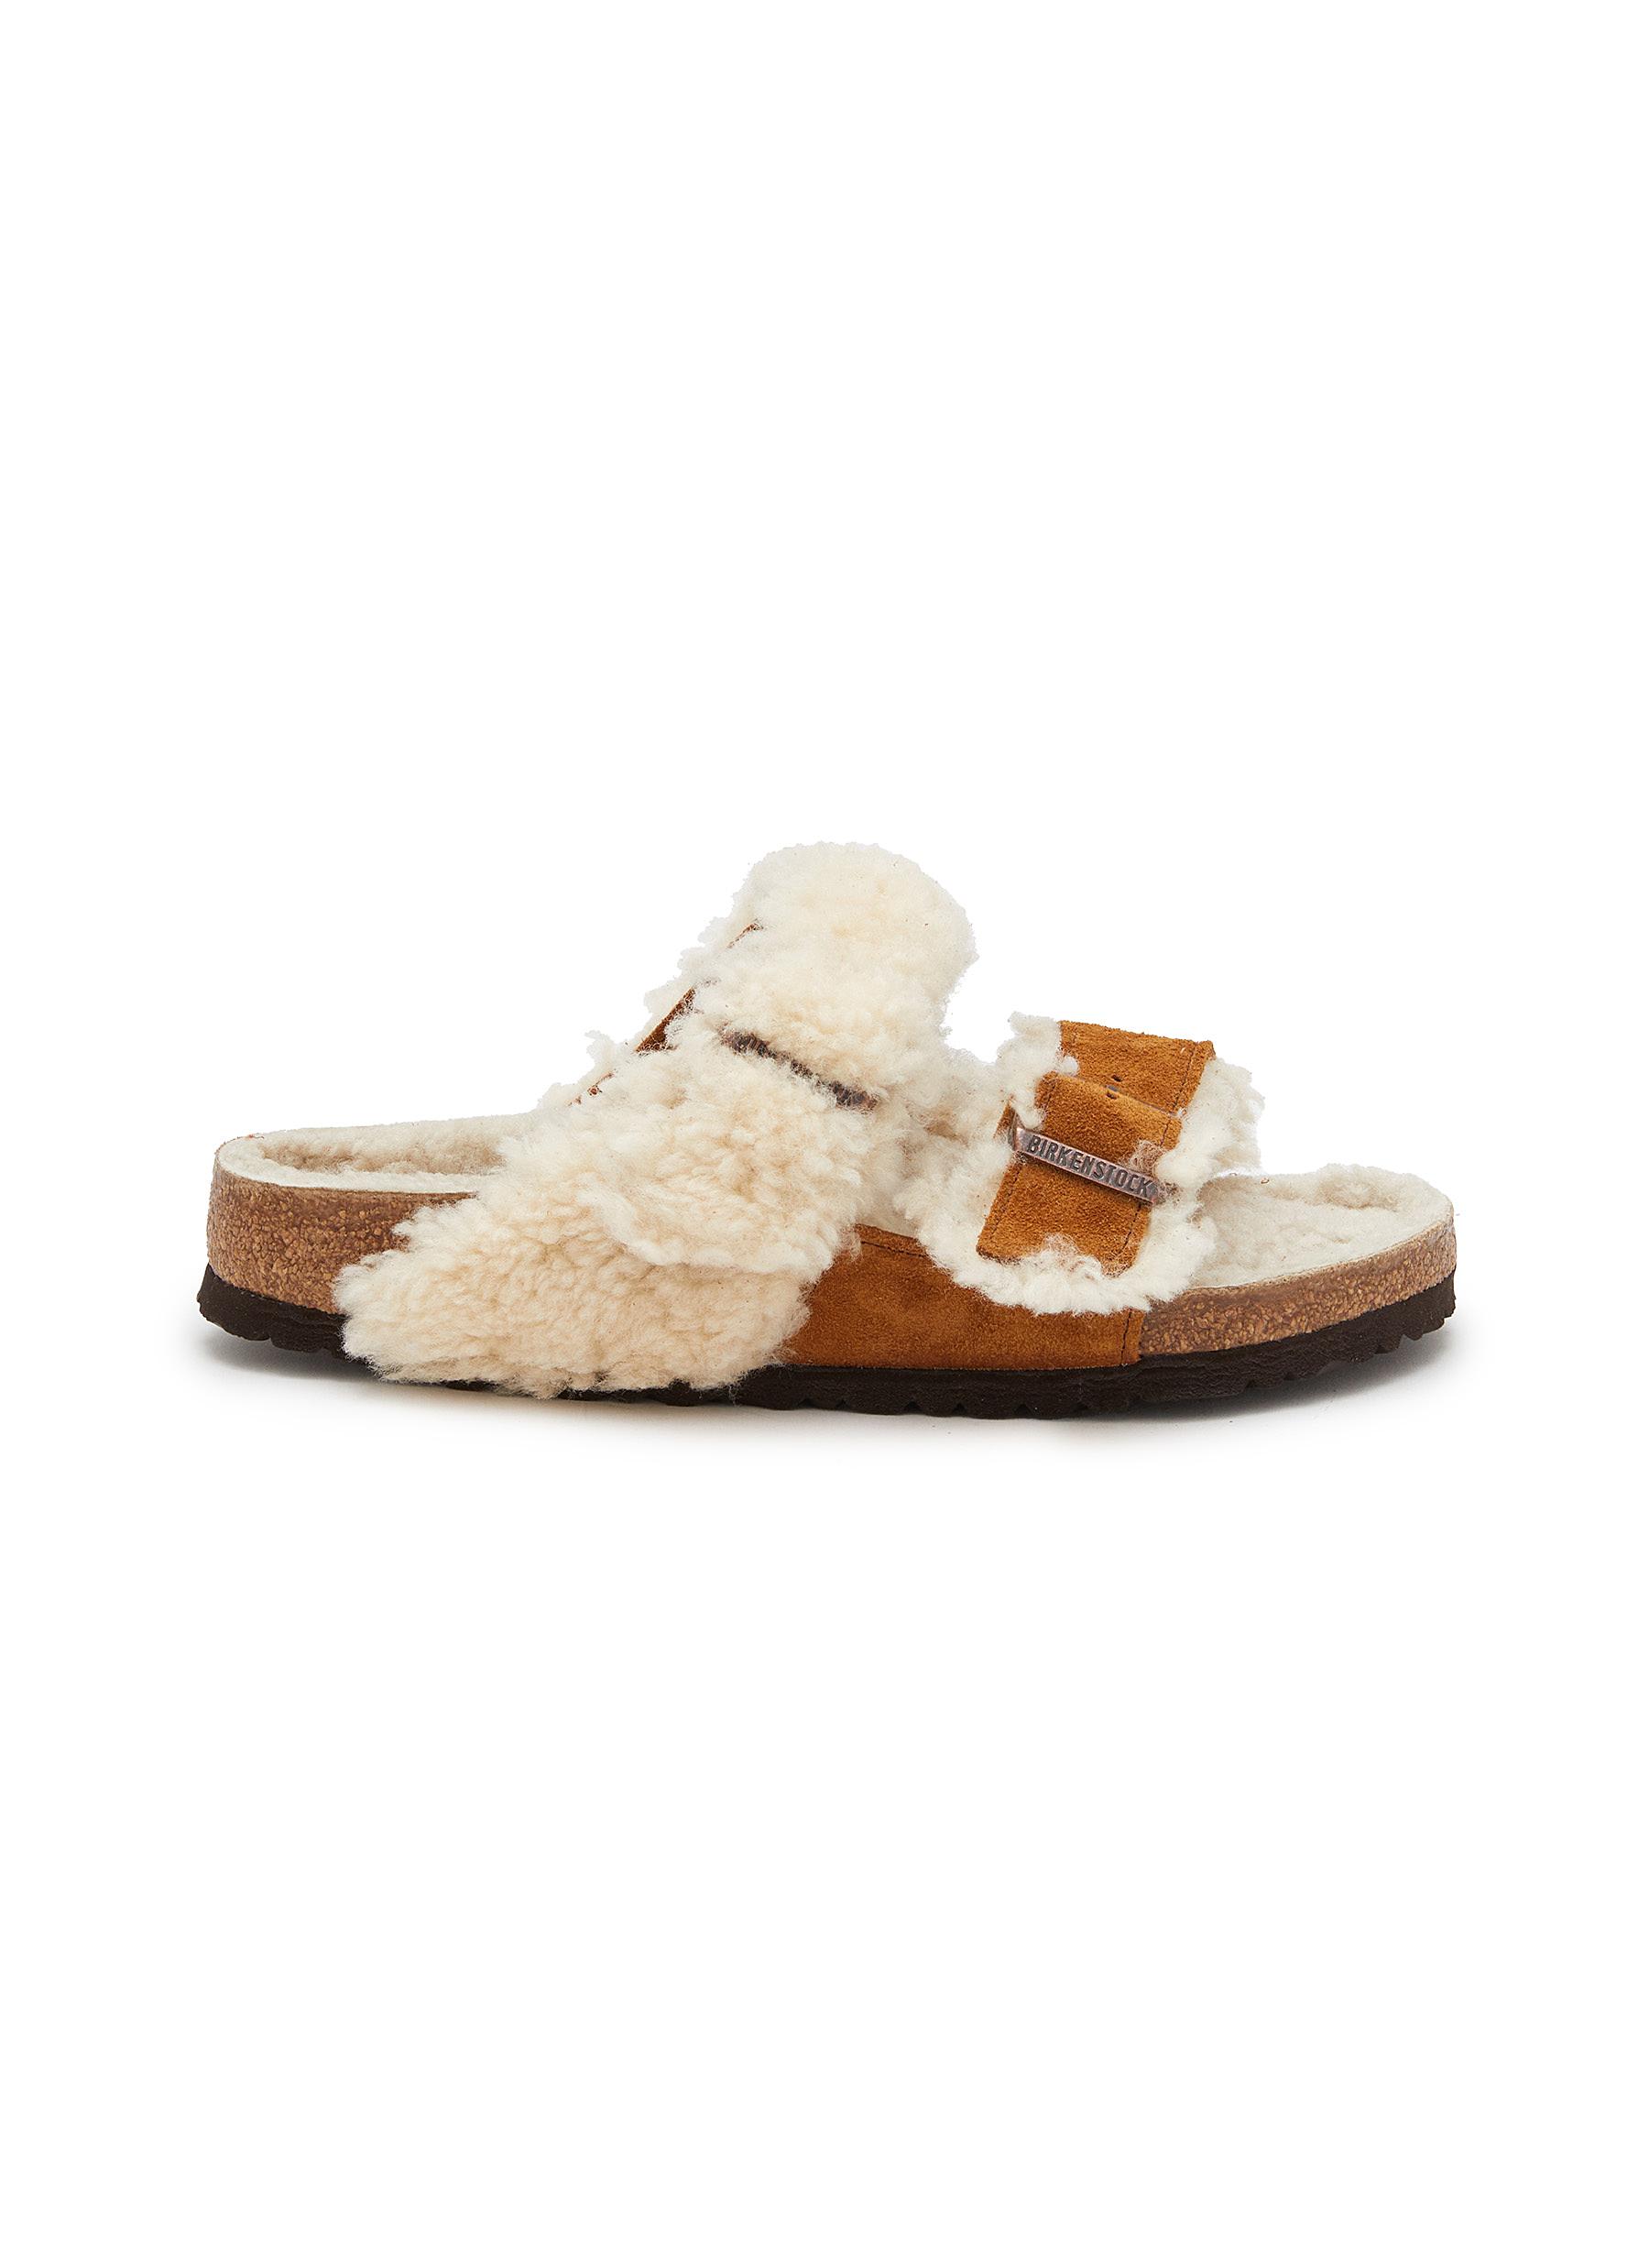 Le Fashion: These Birkenstock Shearling Sandals Are Perfect for Fall